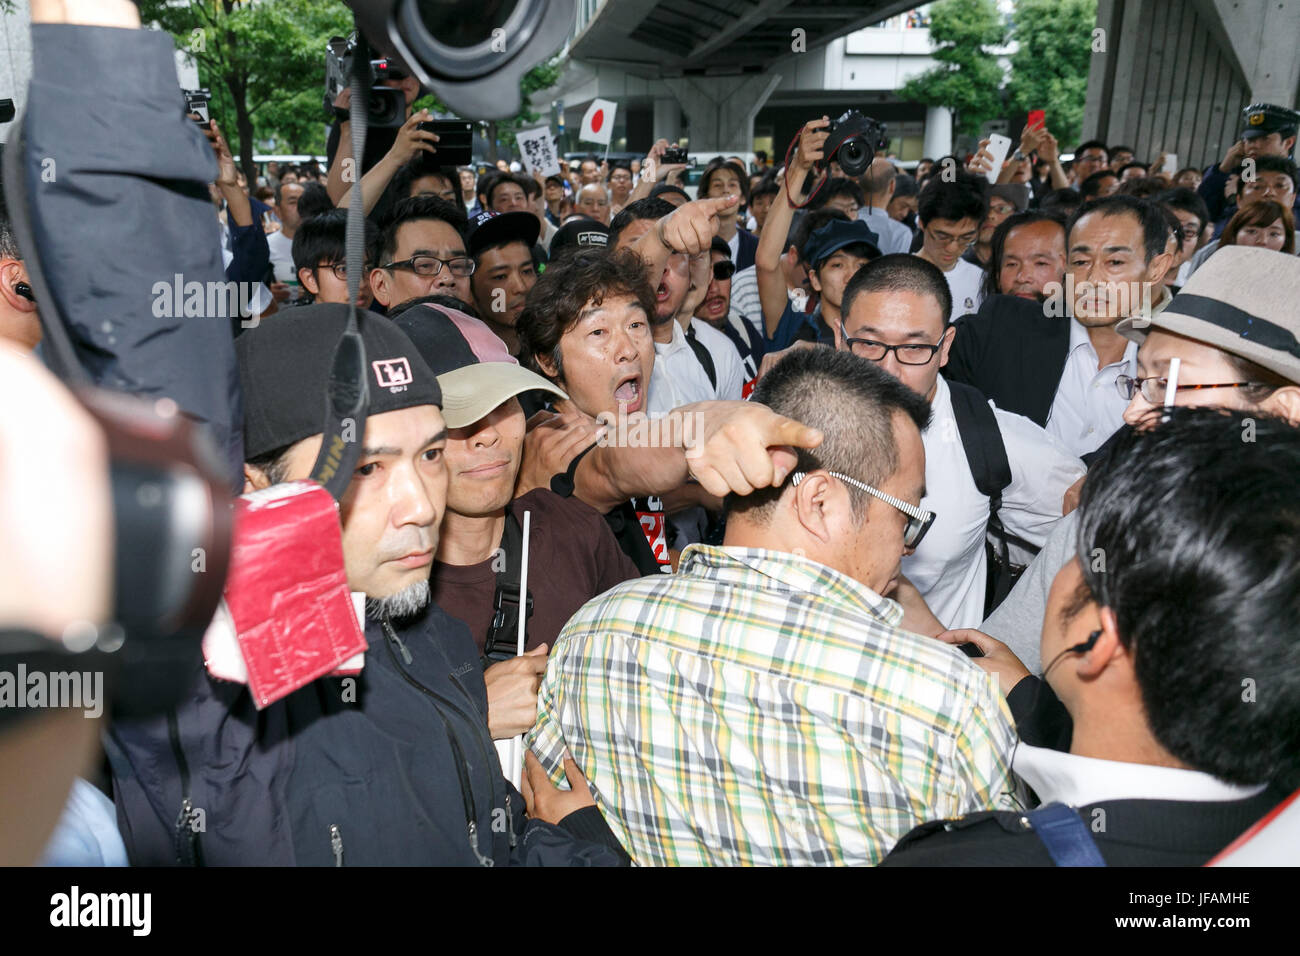 Tokyo, Japan. 1st July, 2017. Anti-Abe protesters clash with supporters of the Liberal Democratic Party of Japan during a campaign event for tomorrow's Tokyo Metropolitan Assembly election on July 1, 2017, Tokyo, Japan. A group of anti-Abe protesters appeared holding placards and chanting against the Prime Minister during the campaign event in support of LDP party candidate Aya Nakamura. Credit: Rodrigo Reyes Marin/AFLO/Alamy Live News Stock Photo